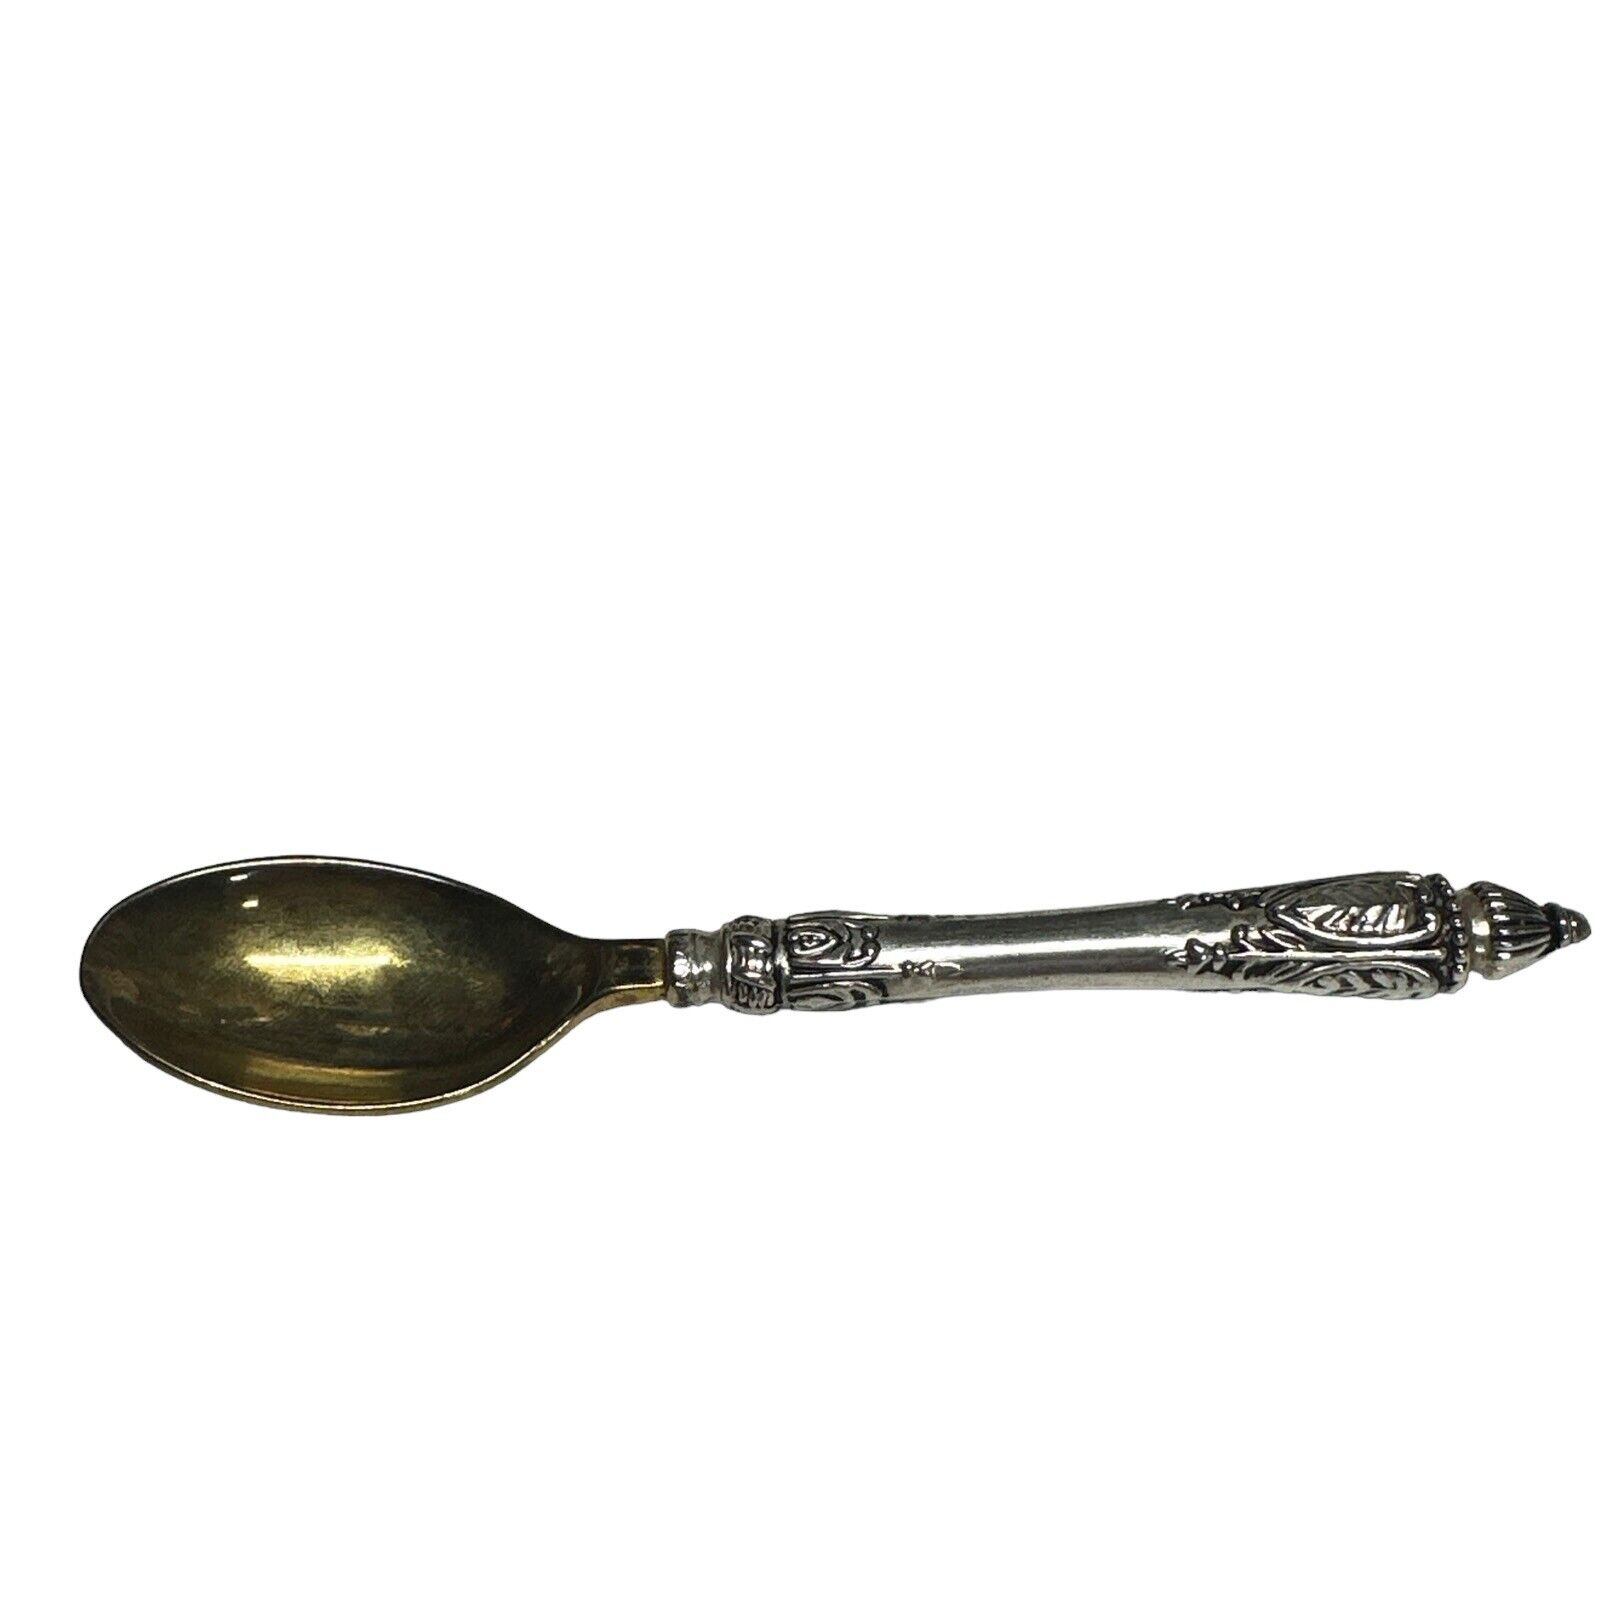 Vintage Godinger Small Spoon 4.75” Long - Gold And Silver Tone - Ornate Handle 